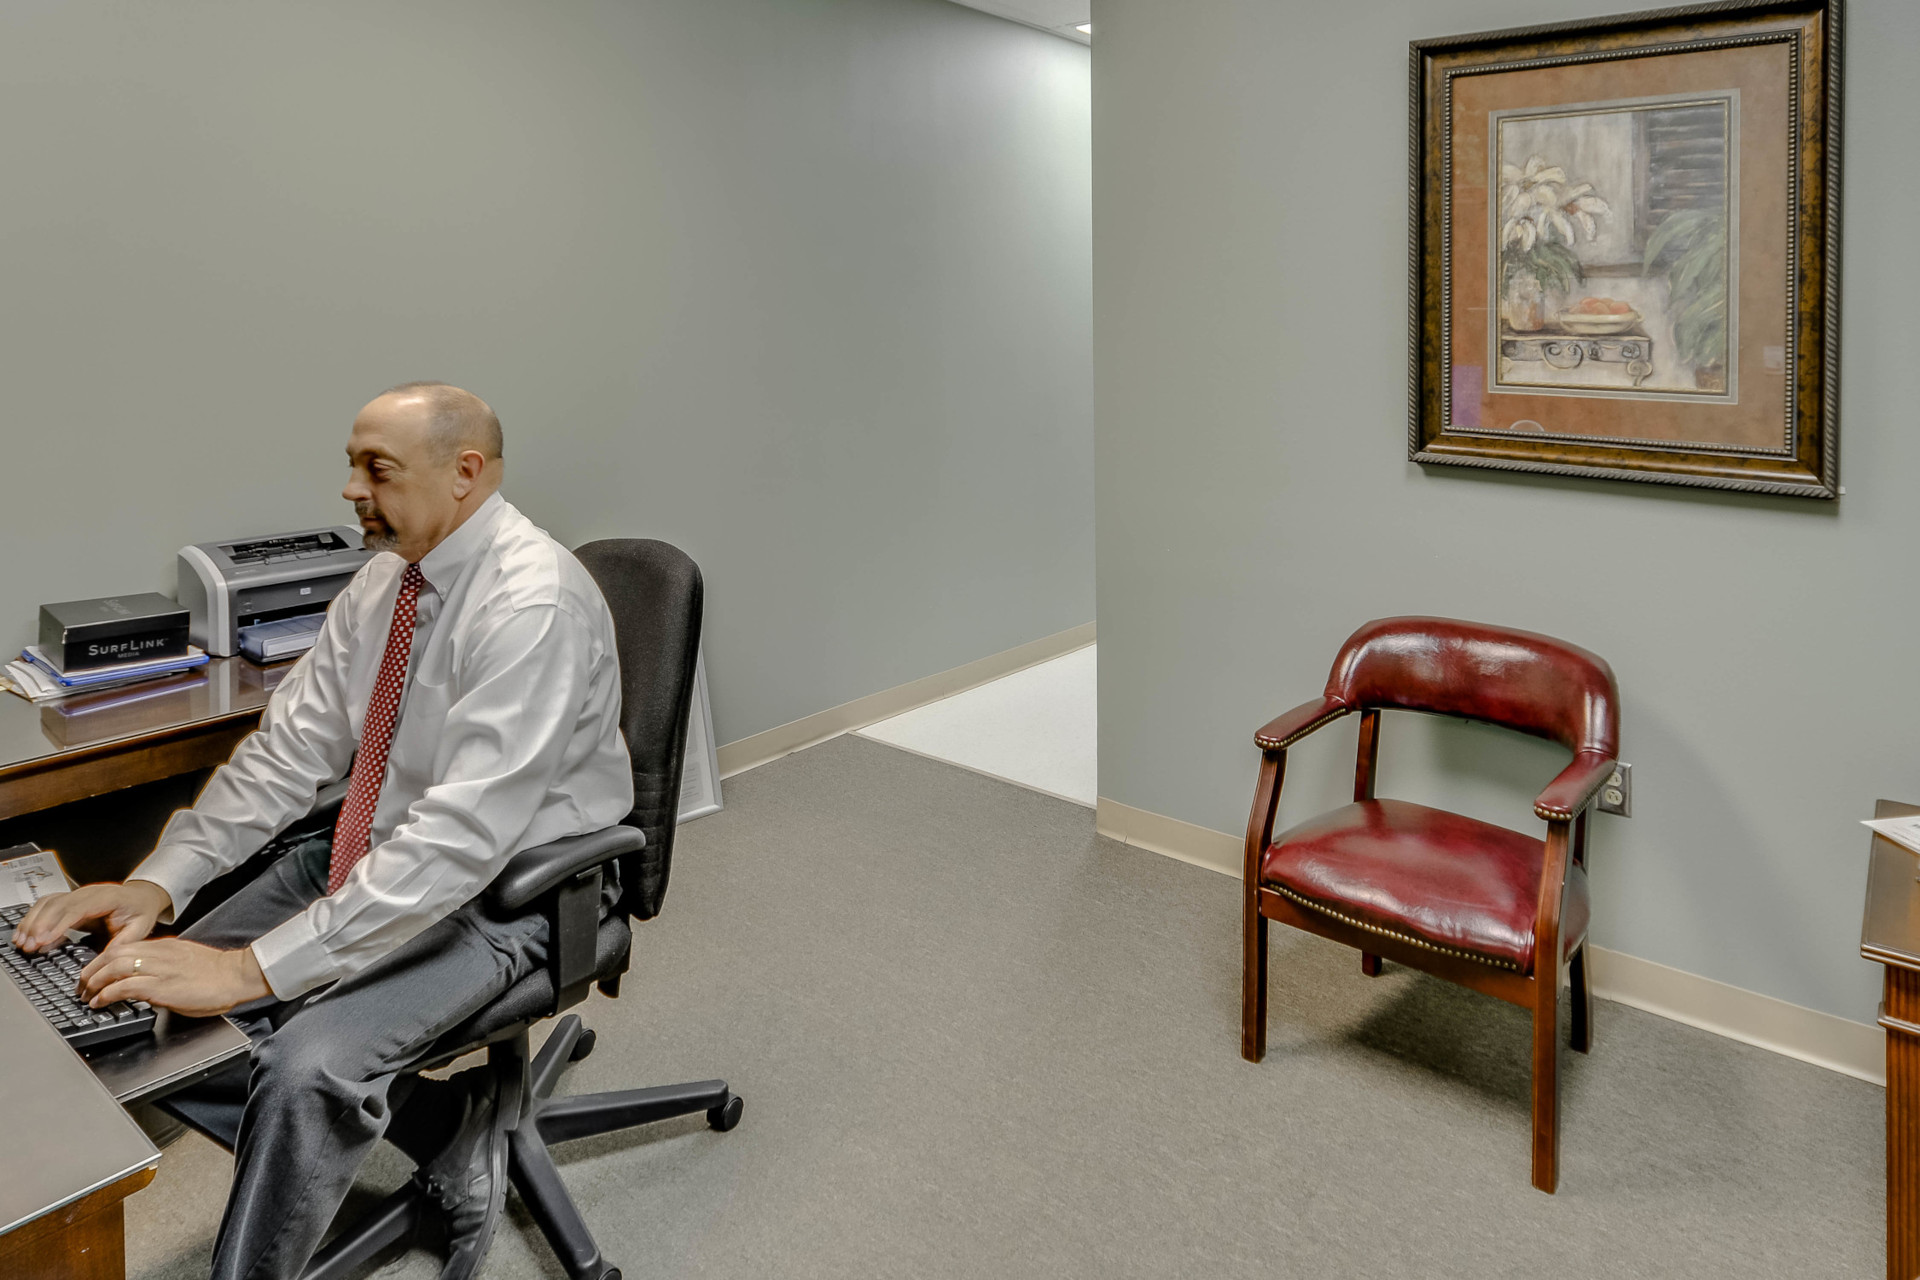 Office at Audible Hearing Centers with man working at keyboard